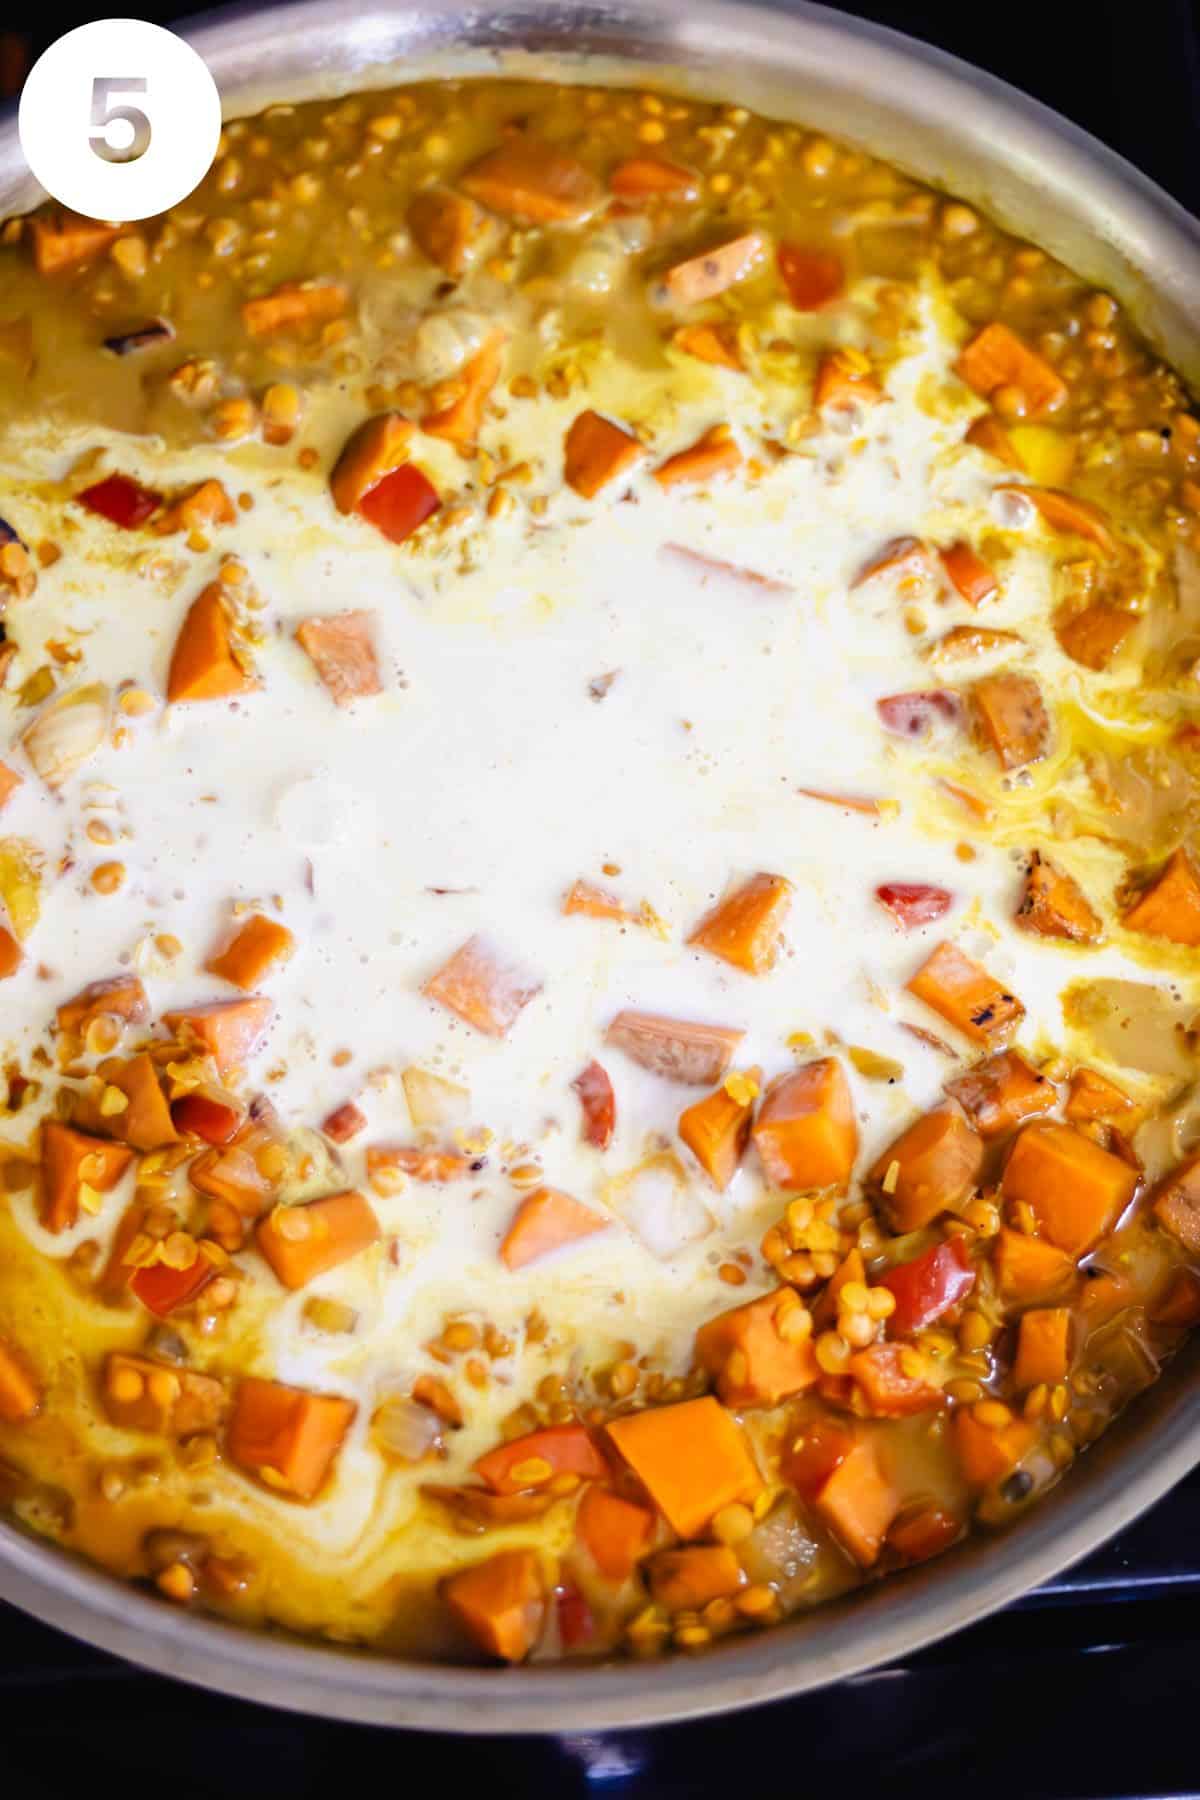 Skillet with lentil and vegetable mixture after a can of coconut milk has been poured on top.